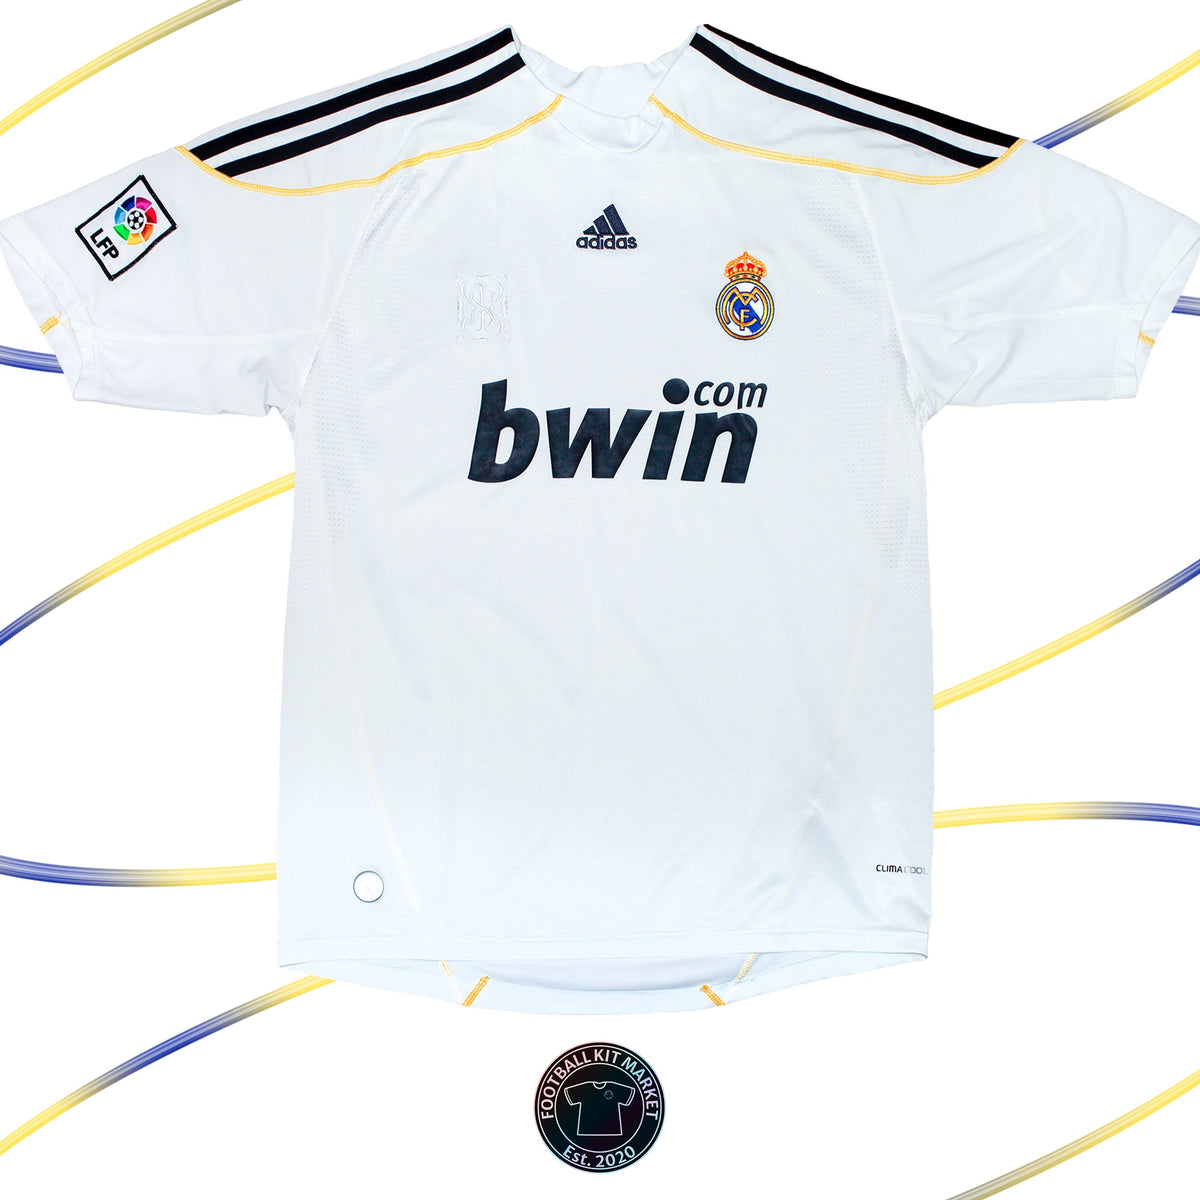 Genuine REAL MADRID Home Shirt (2009-2010) - ADIDAS (XL) - Product Image from Football Kit Market